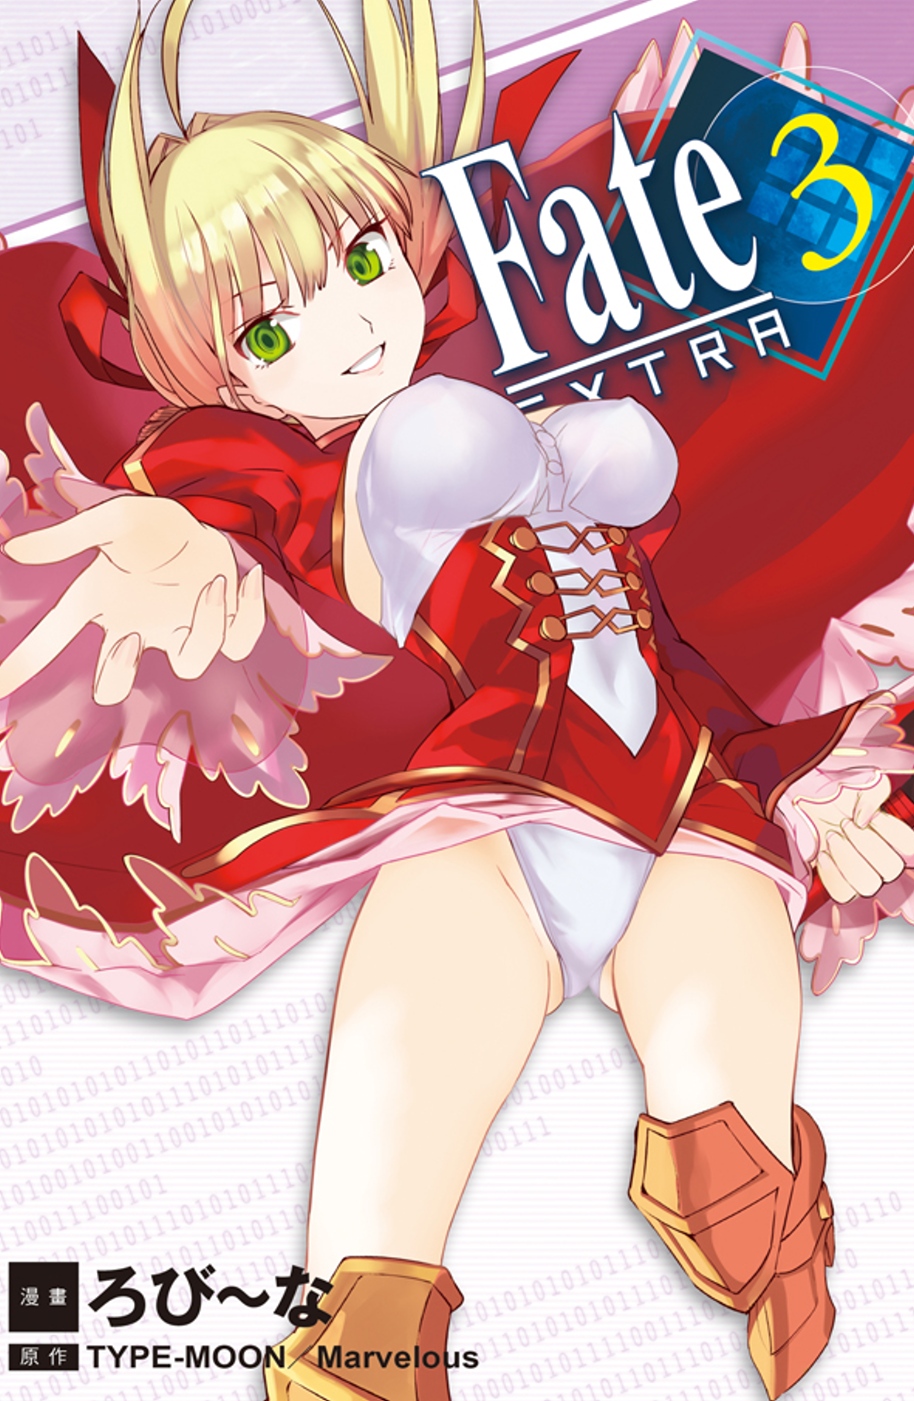 Fate / EXTRA 3